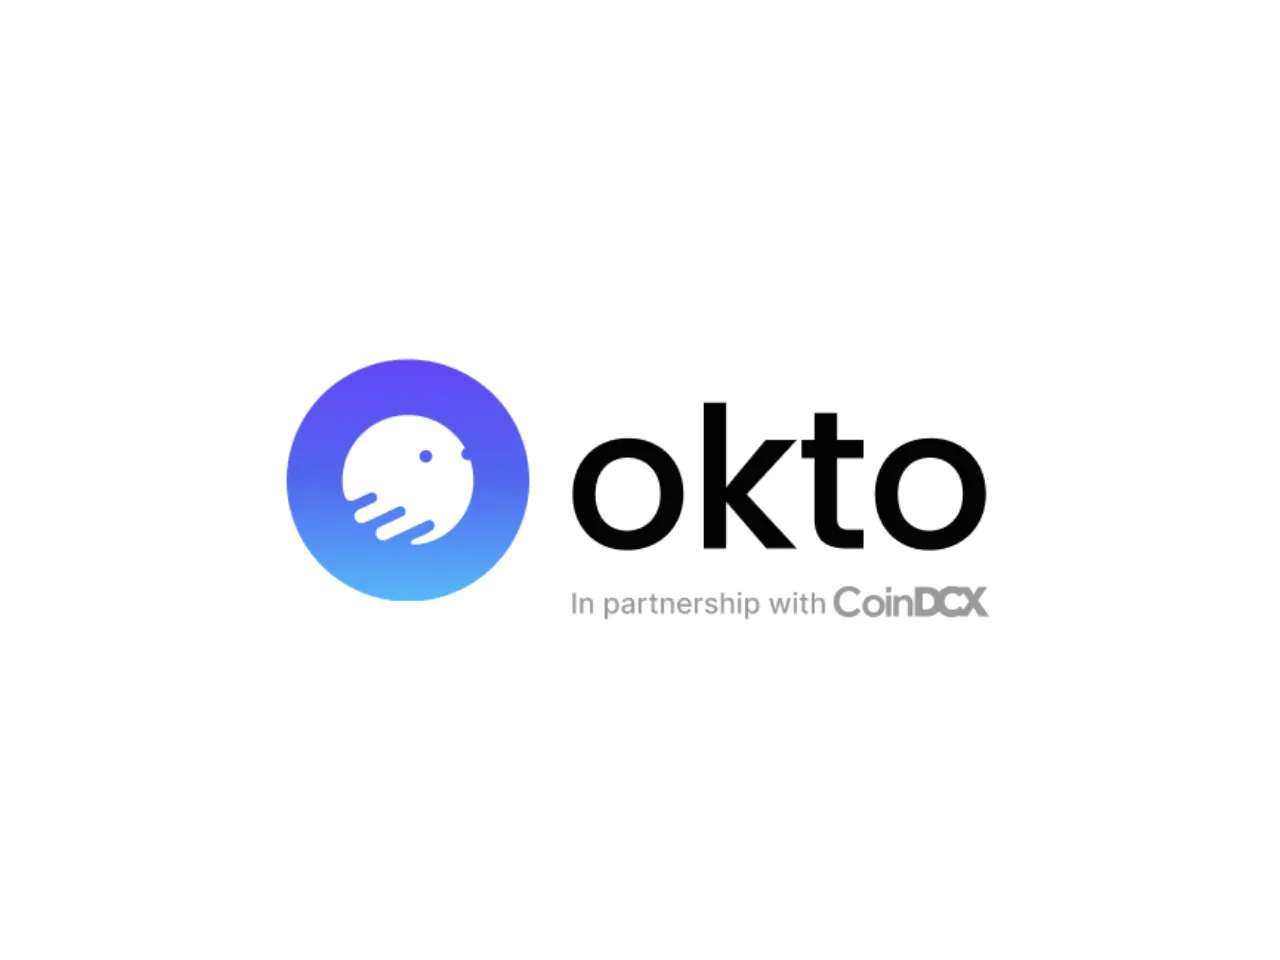 Crypto exchange CoinDCX announces industry-first Orchestration Layer Okto